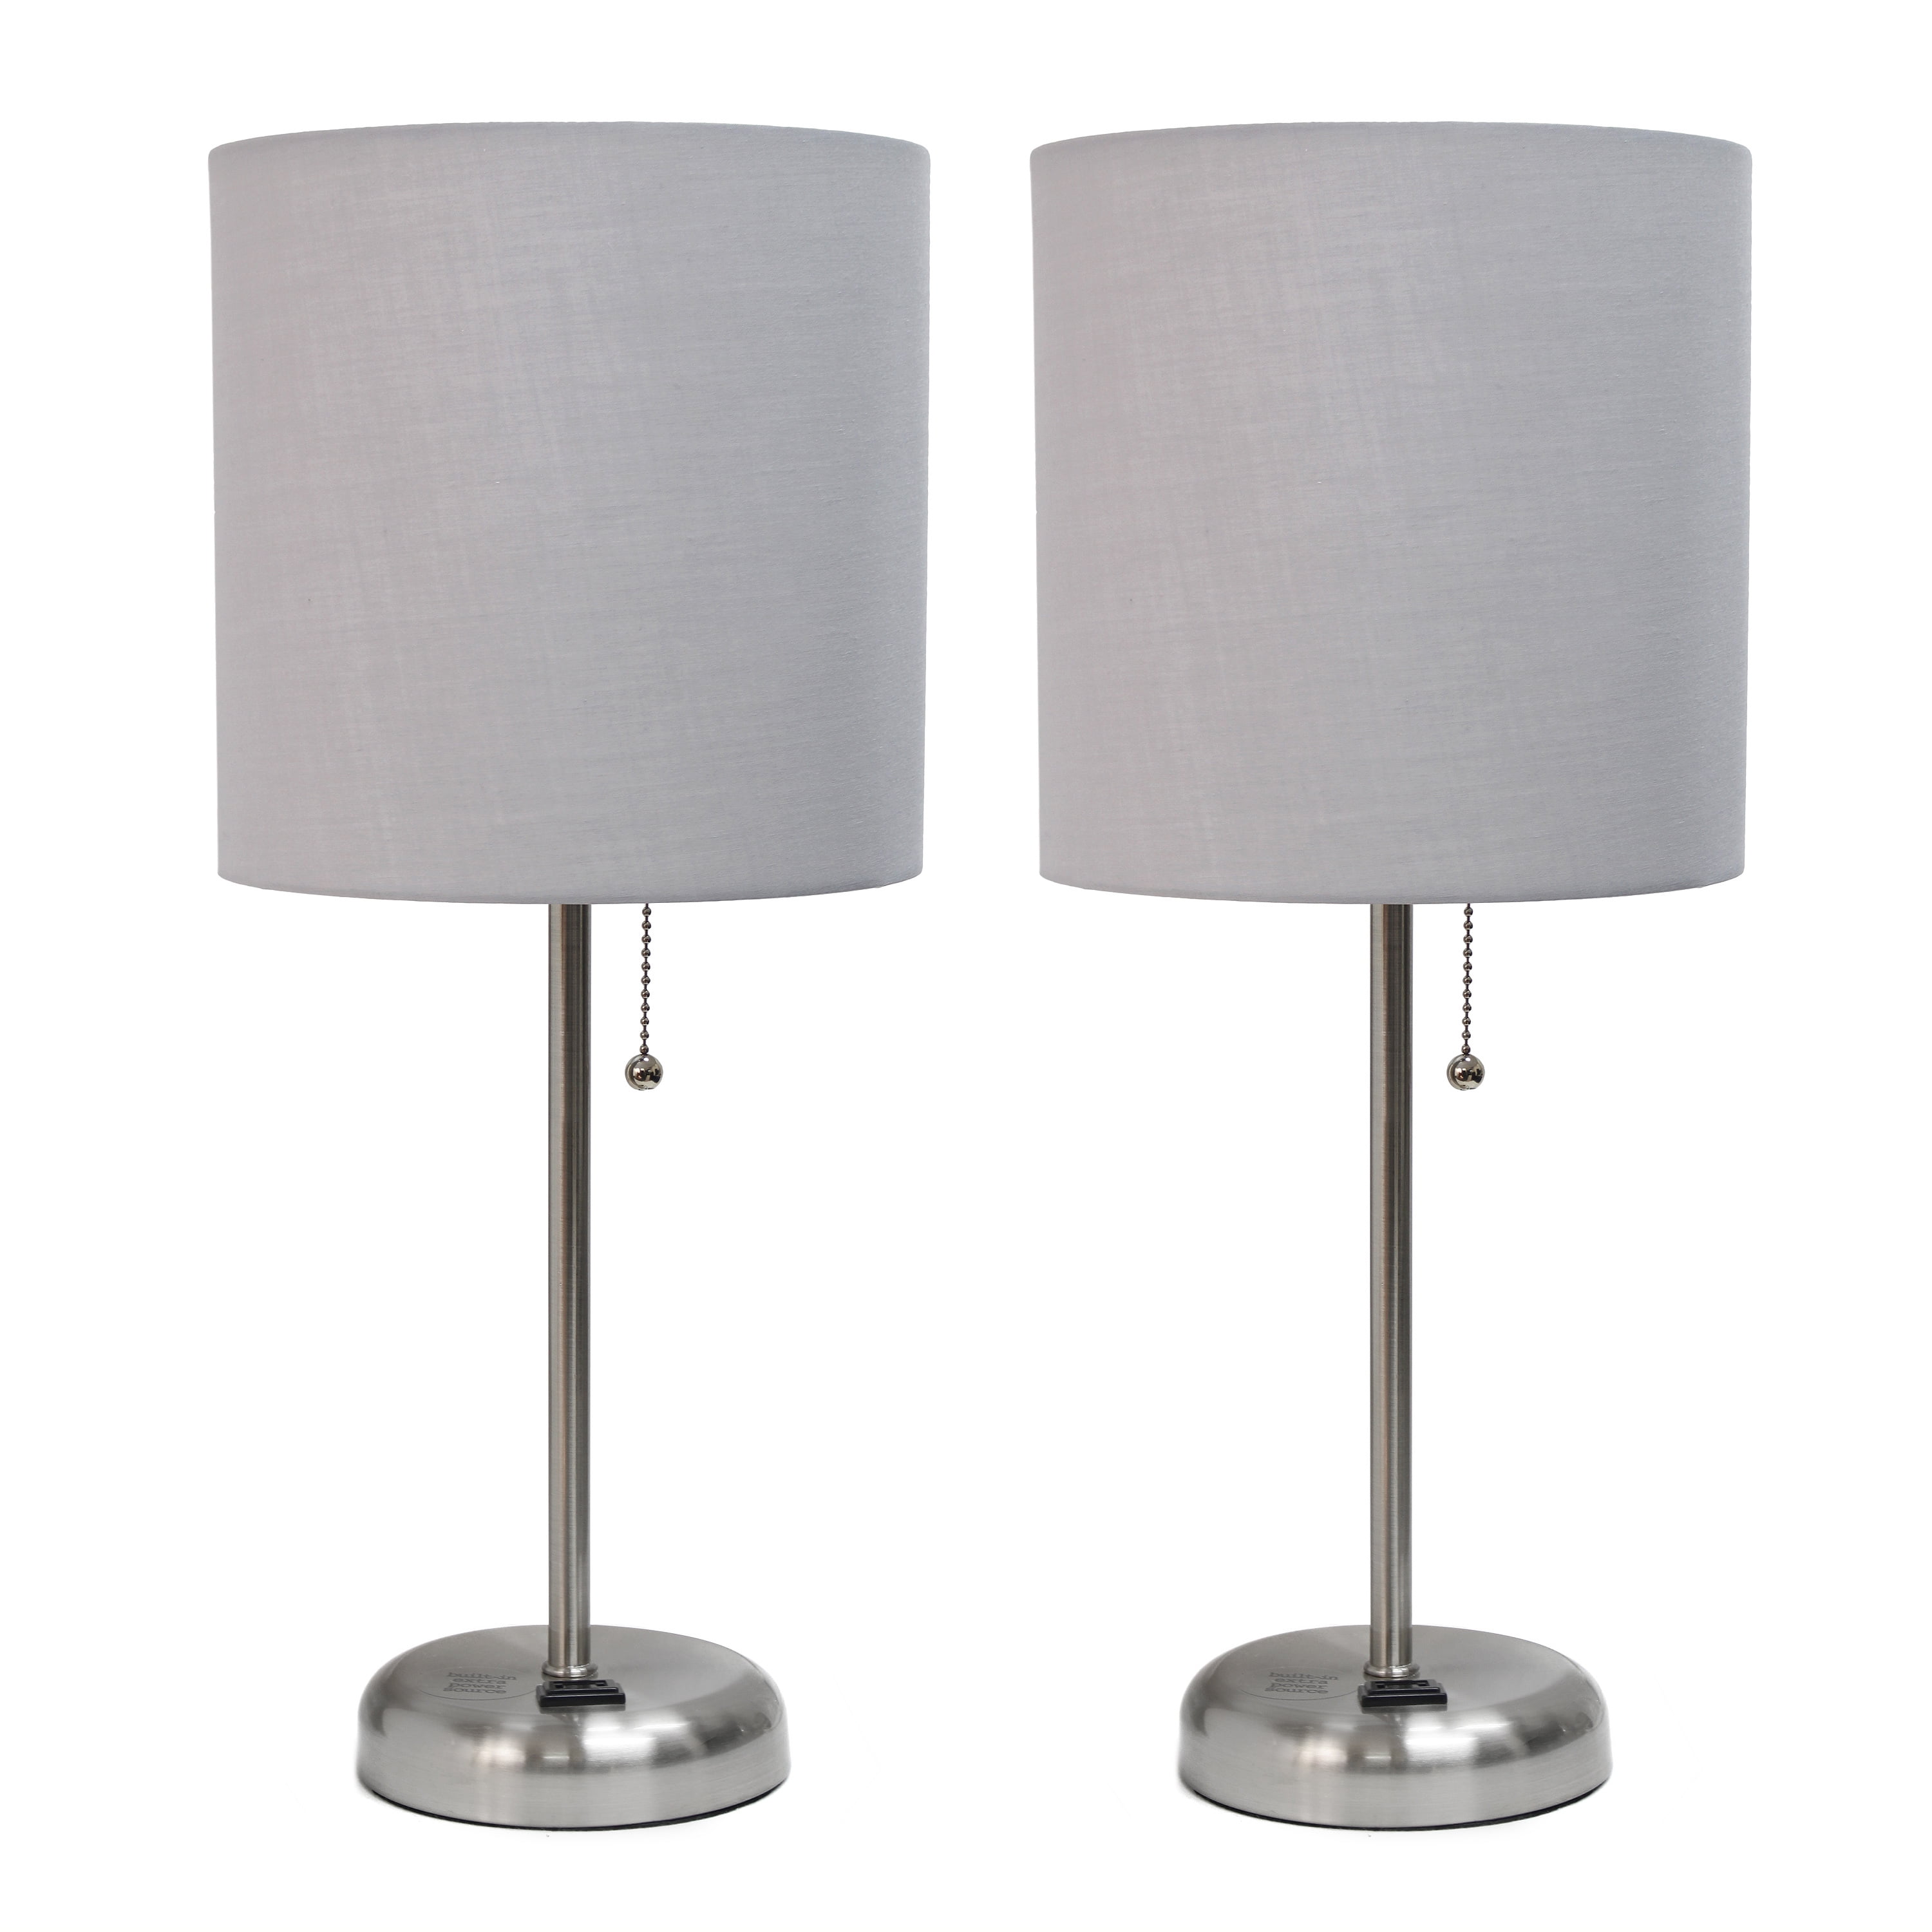 Lc2001-gry-2pk Brushed Steel Stick Table Lamp With Charging Outlet & Fabric Shade, Gray - Set Of 2